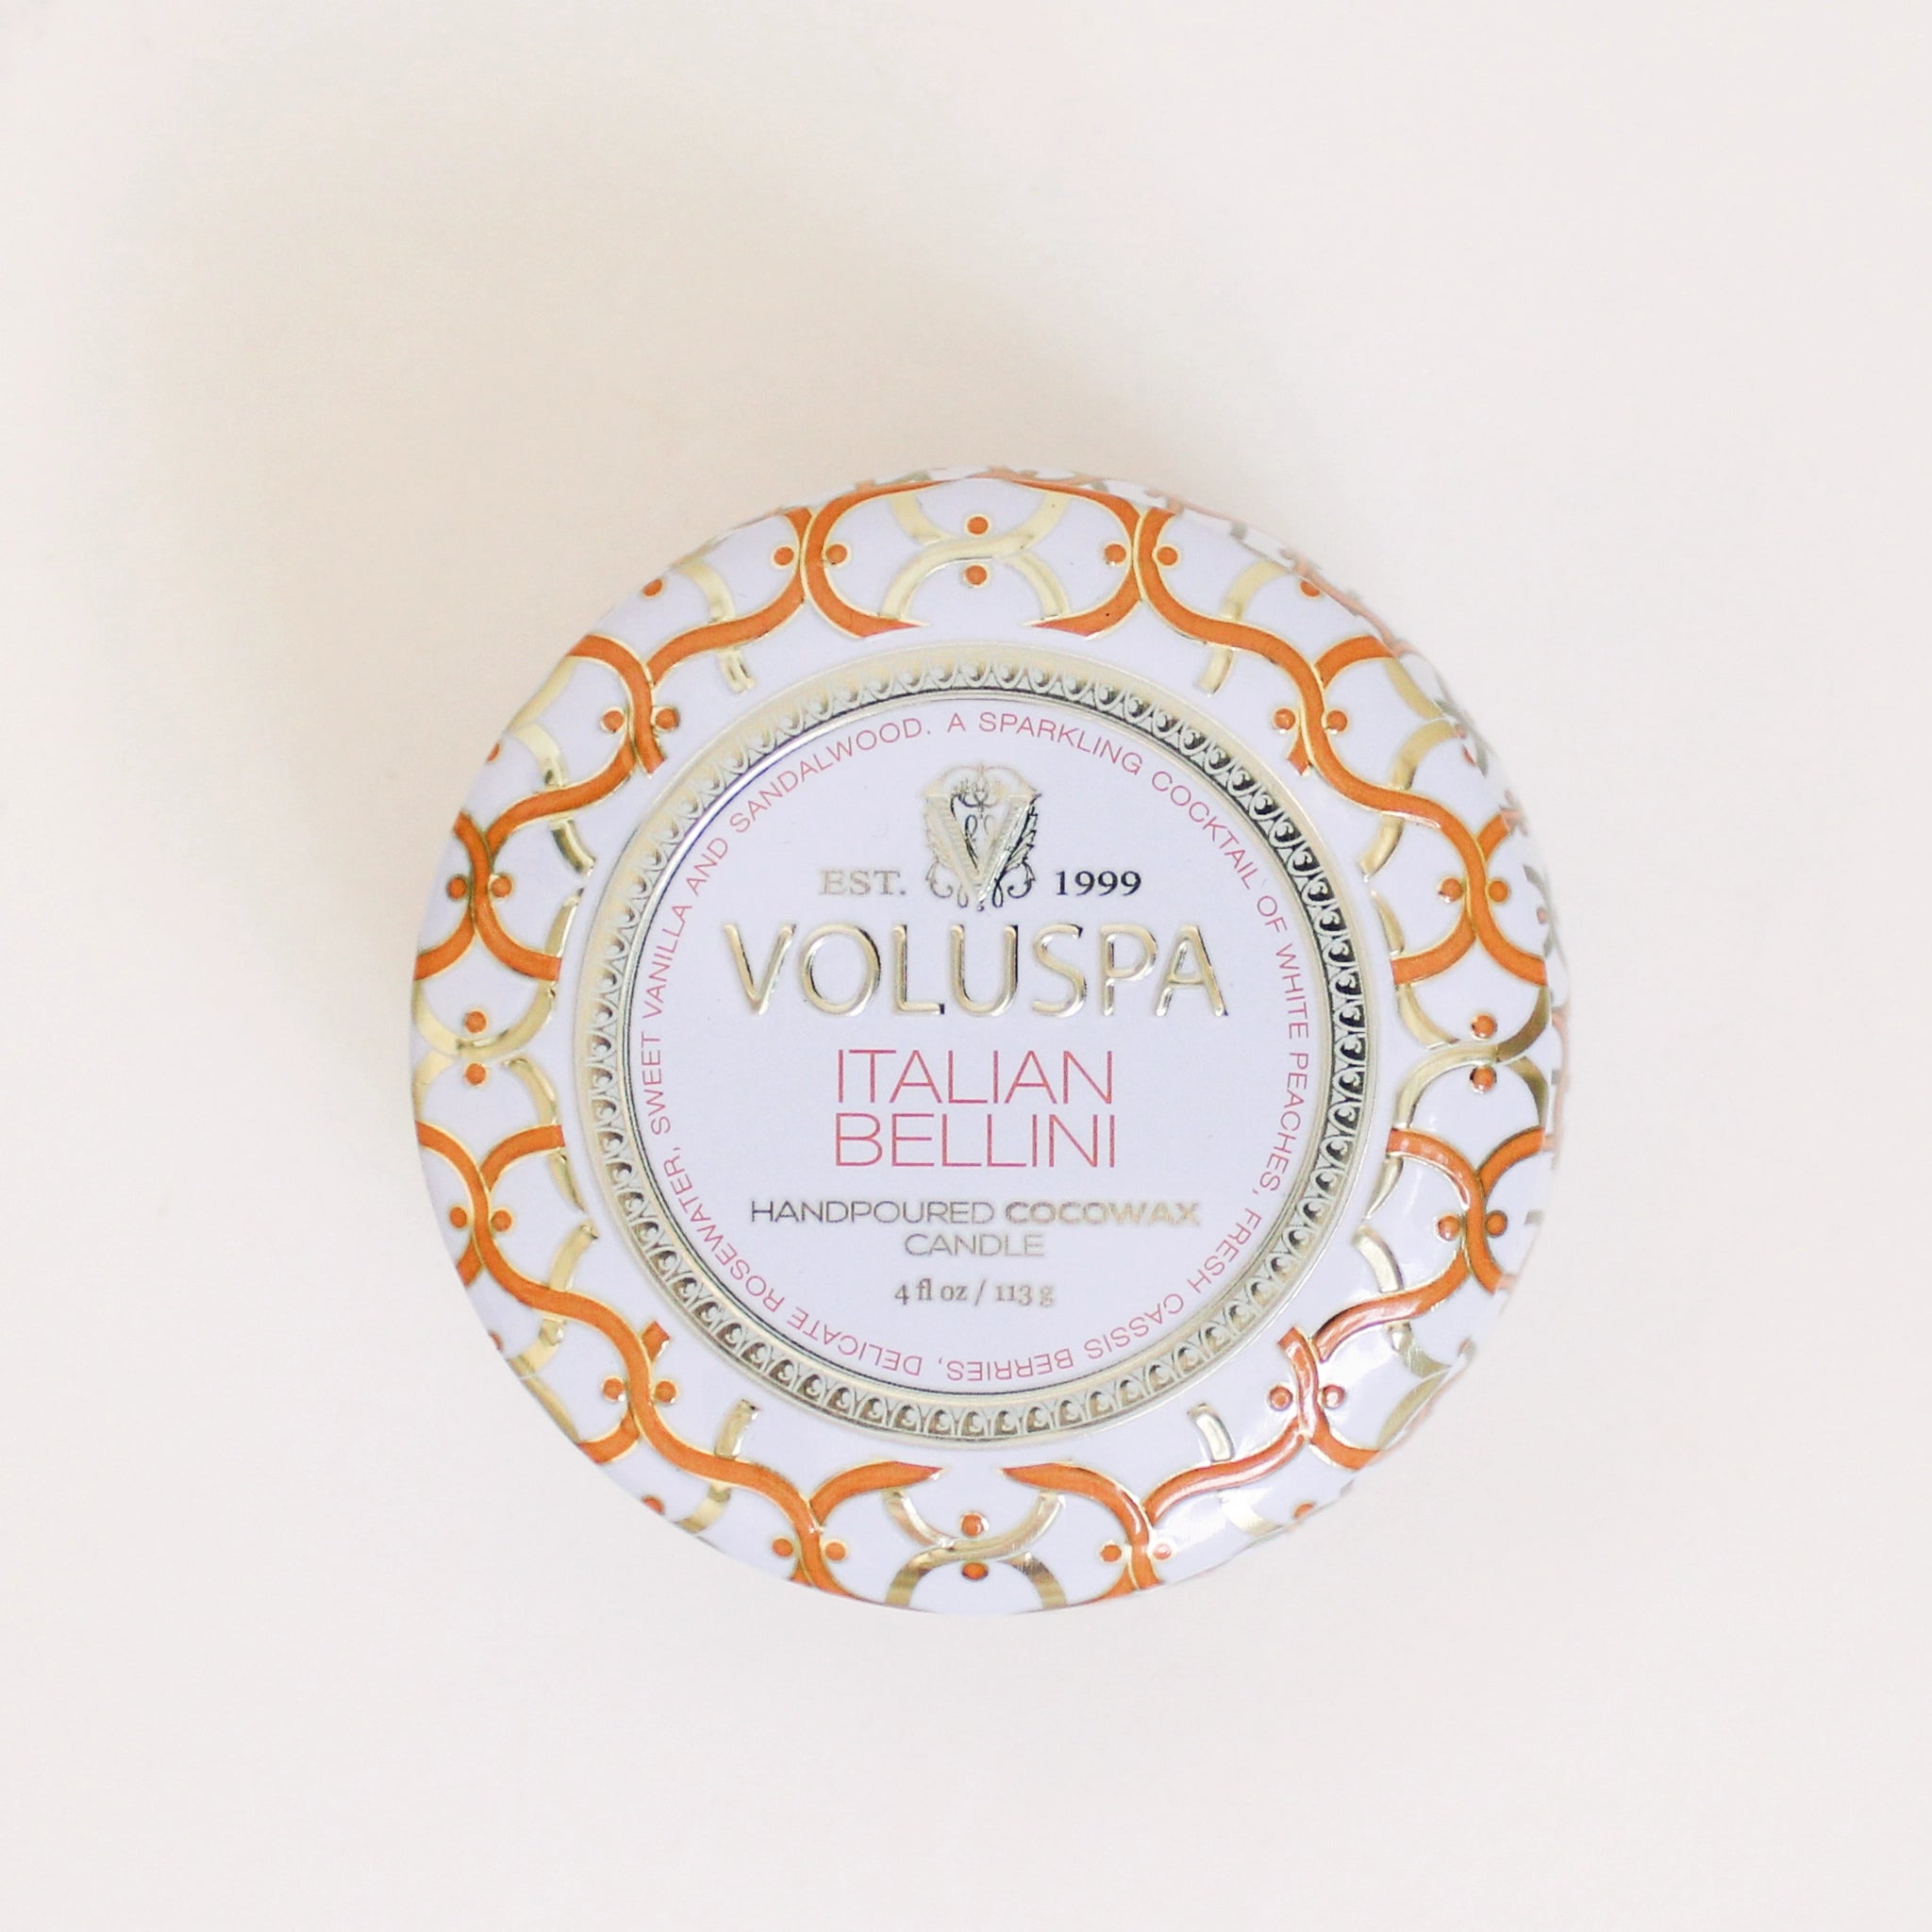 On a cream background is a orange and white tin that contains a candle along with a circle label in the center of the lid that reads, "Voluspa Italian Bellini".